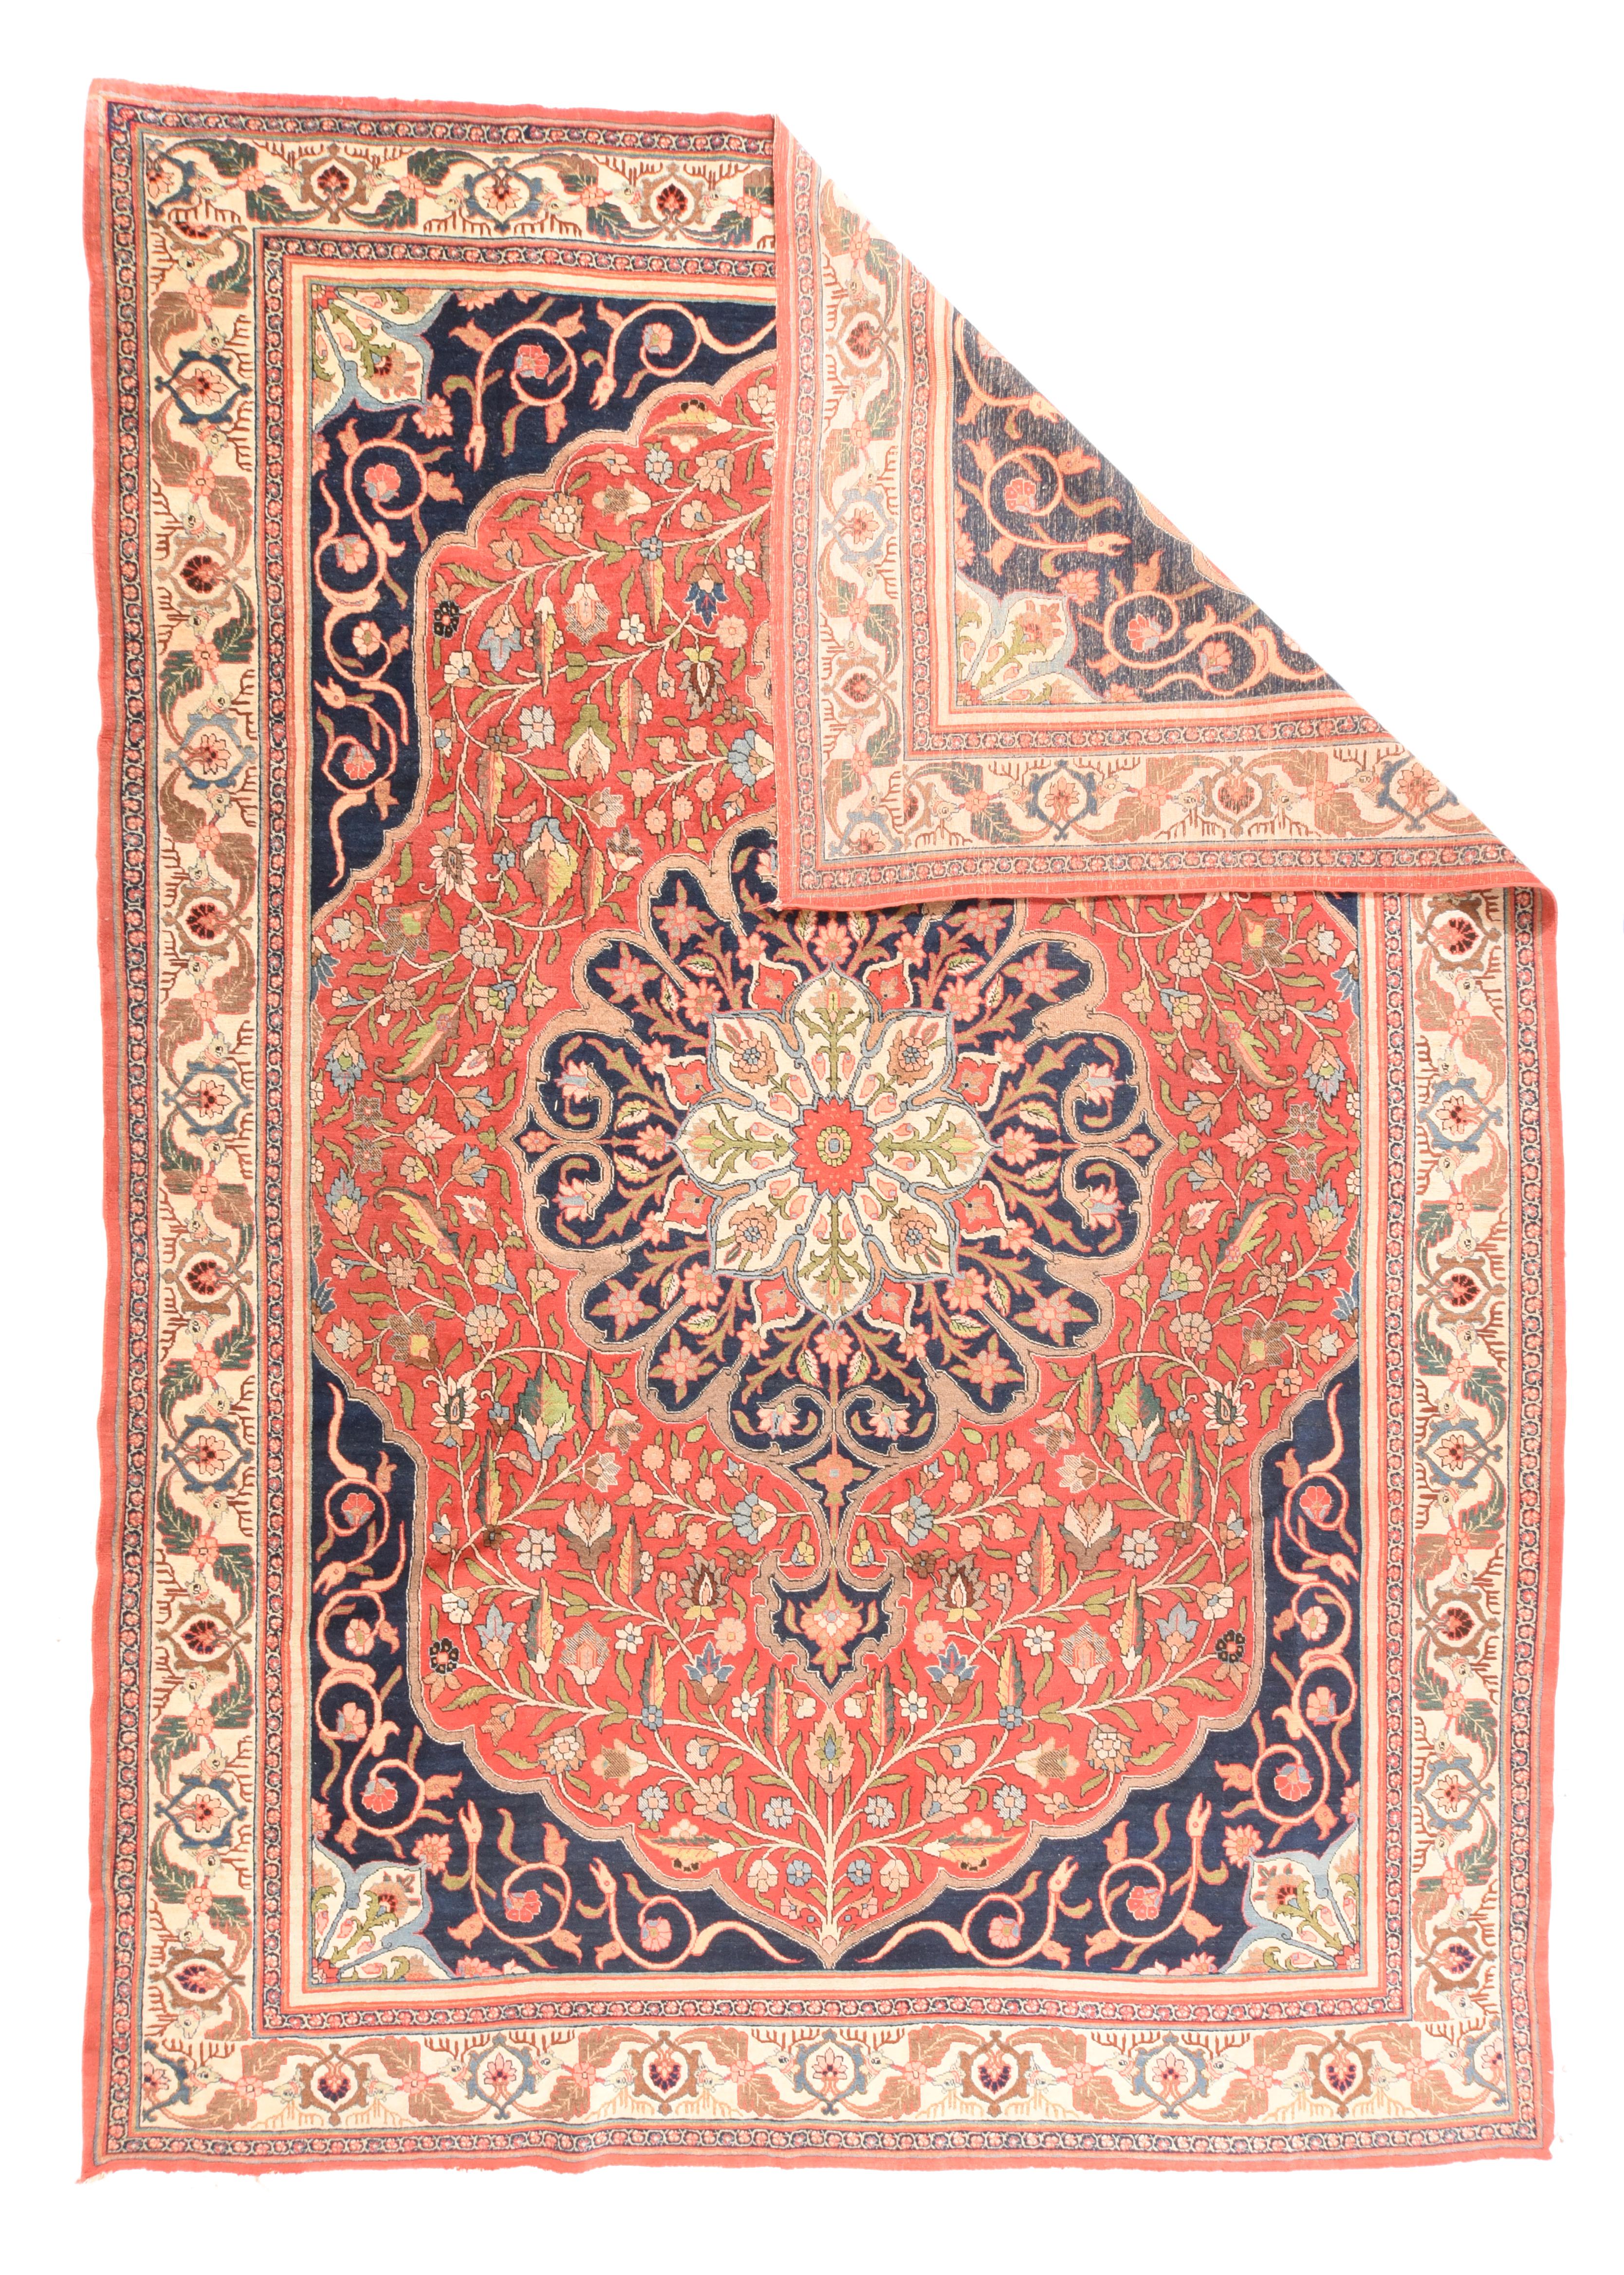 Antique Tabriz Rug 8'6'' x 11'6''. This archetypal, magnificently characteristic NW Persian city carpet comes from the best period of Tabriz weaving It shows a 